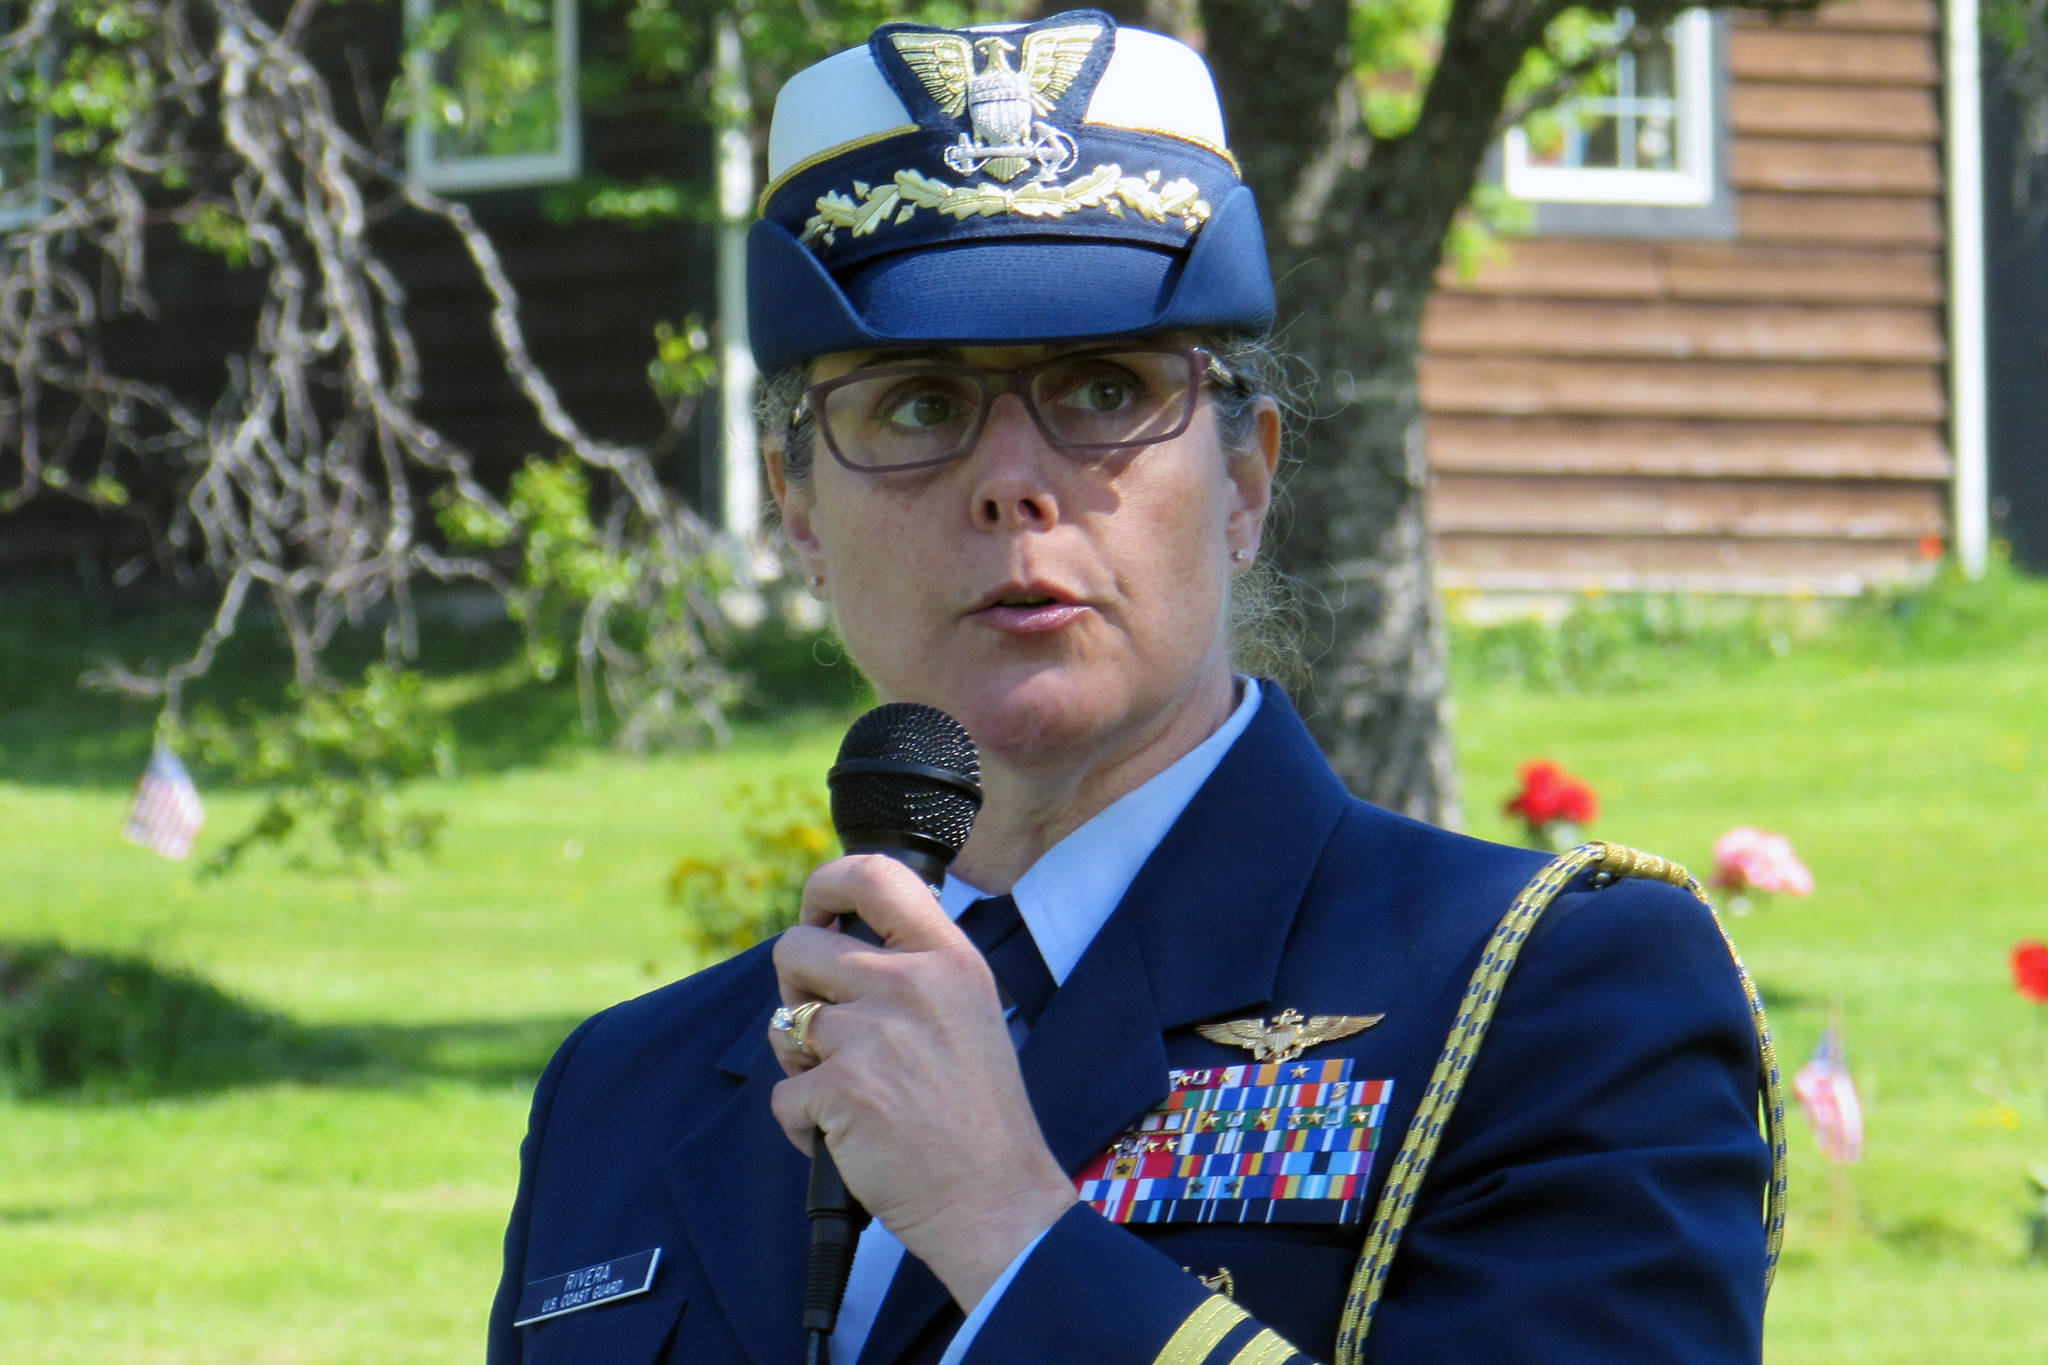 Coast Guard Capt. Melissa Rivera, Chief of Staff for the 17th District, speaks during a Memorial Day Ceremony held at Evergreen Cemetery, Monday, May 27. (Ben Hohenstatt | Juneau Empire)